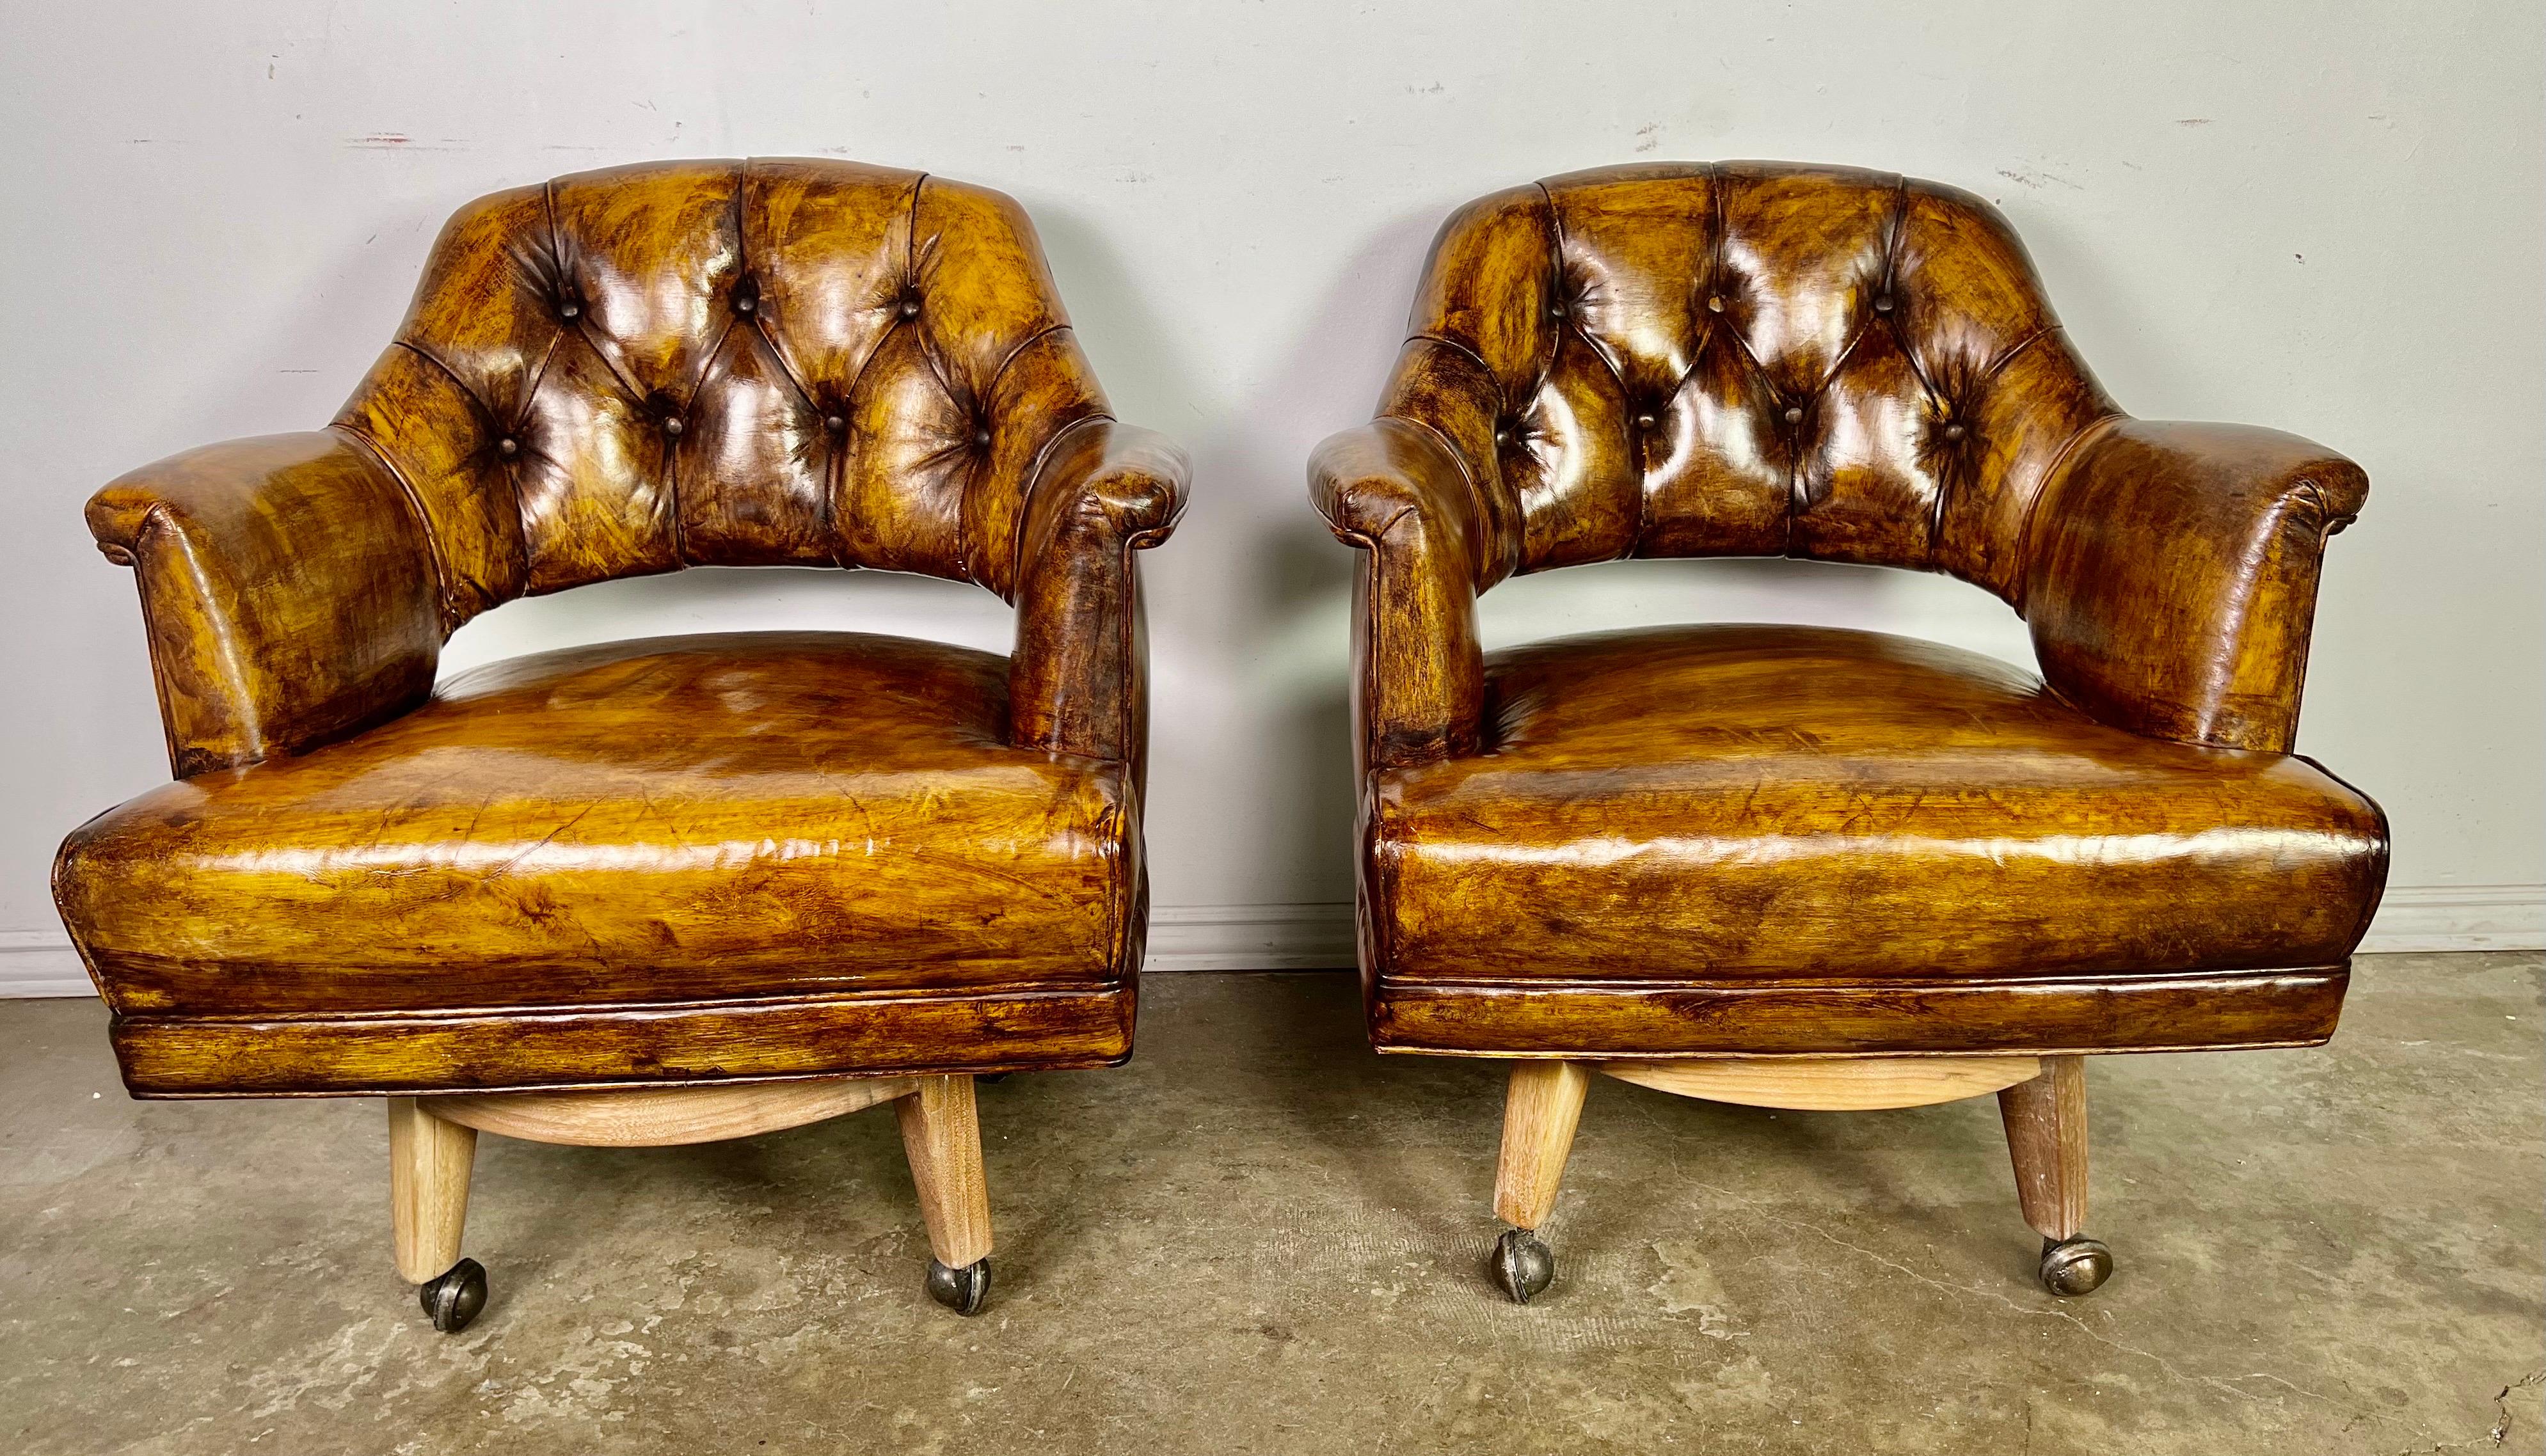 Pair of leather tufted mid-century Monteverdi-Young Swivel armchairs. The chair stands on four natural wood legs attached to a swivel mechanism. The chairs are on casters as well. We have four chairs available if needed.